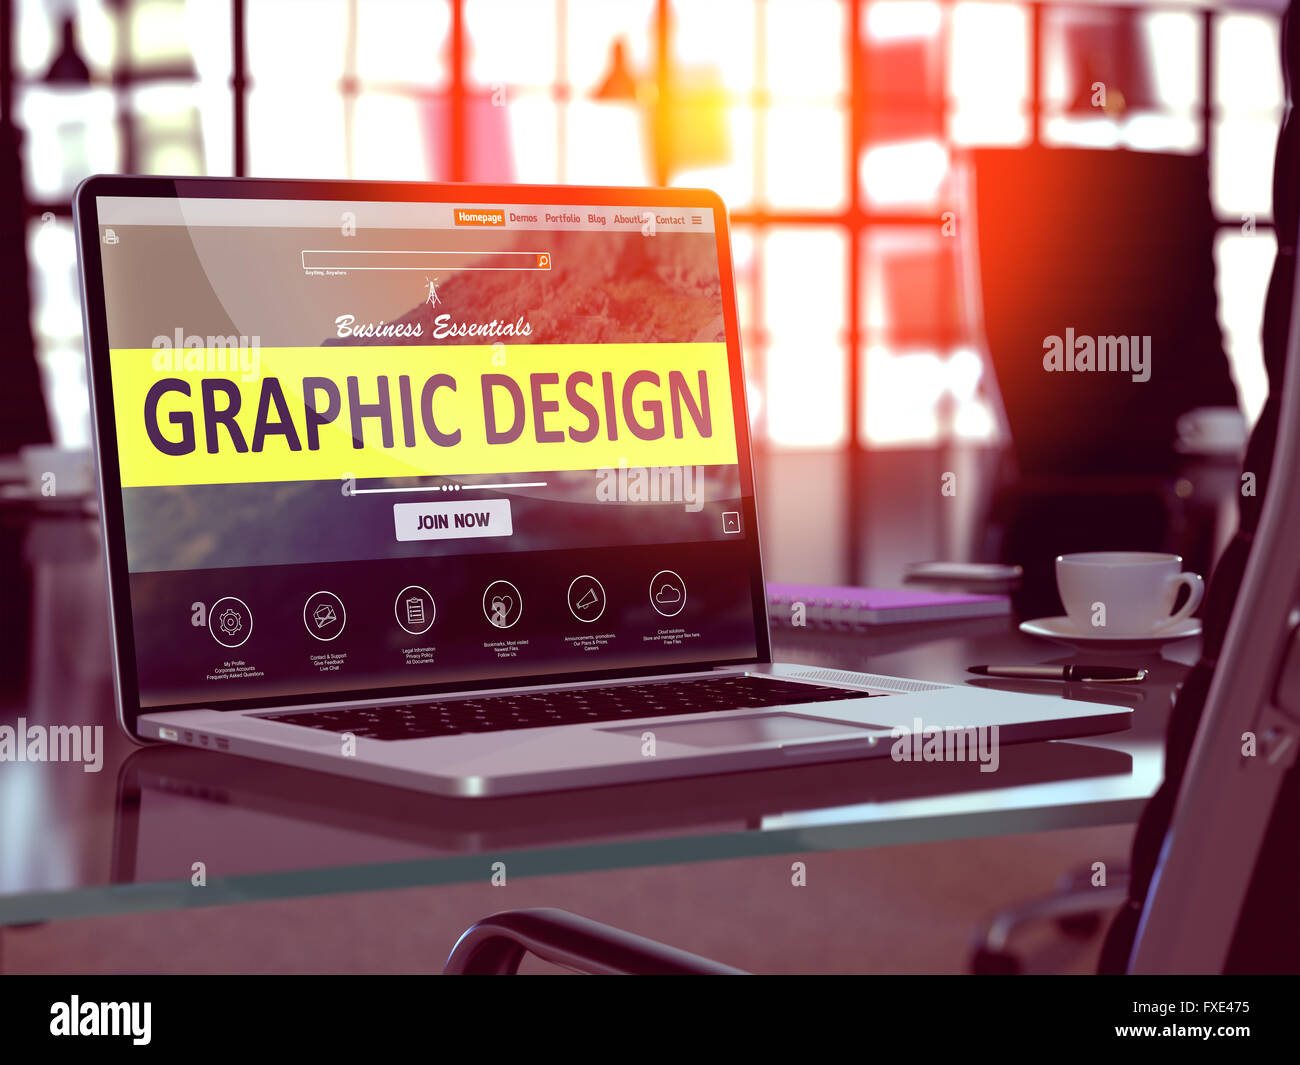 Graphic Design Concept on Laptop Screen. Stock Photo